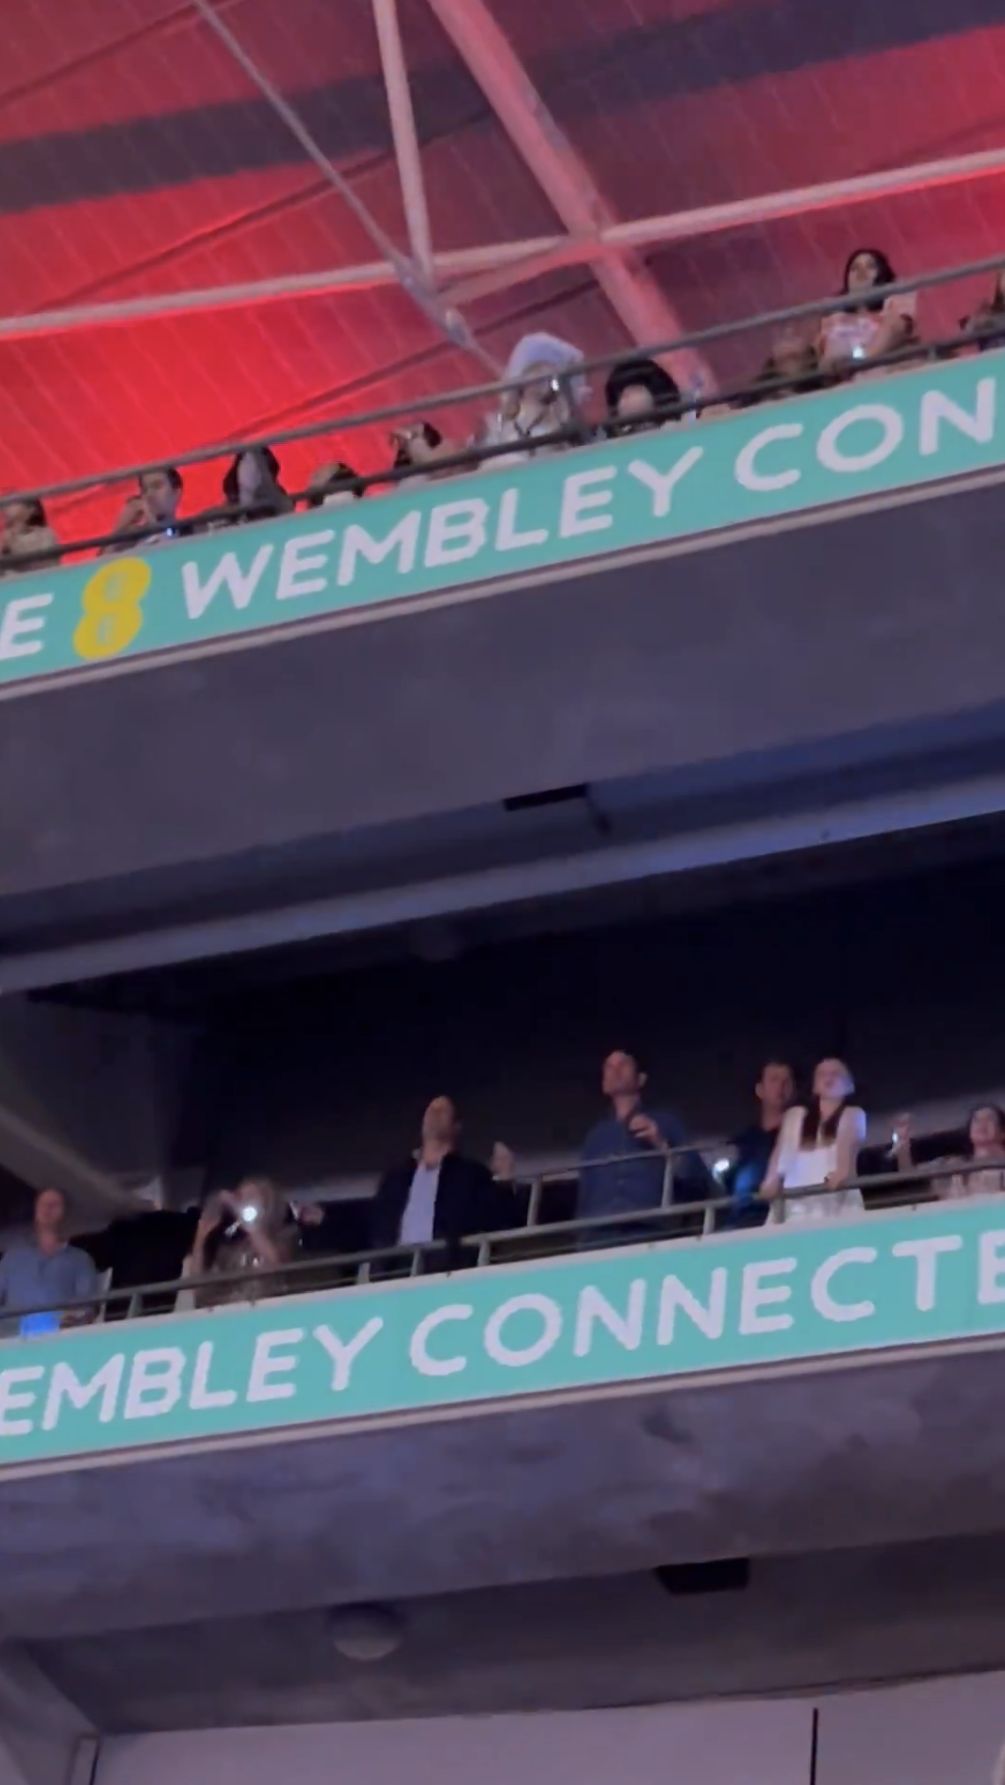 Prince William at the Taylor Swift concert